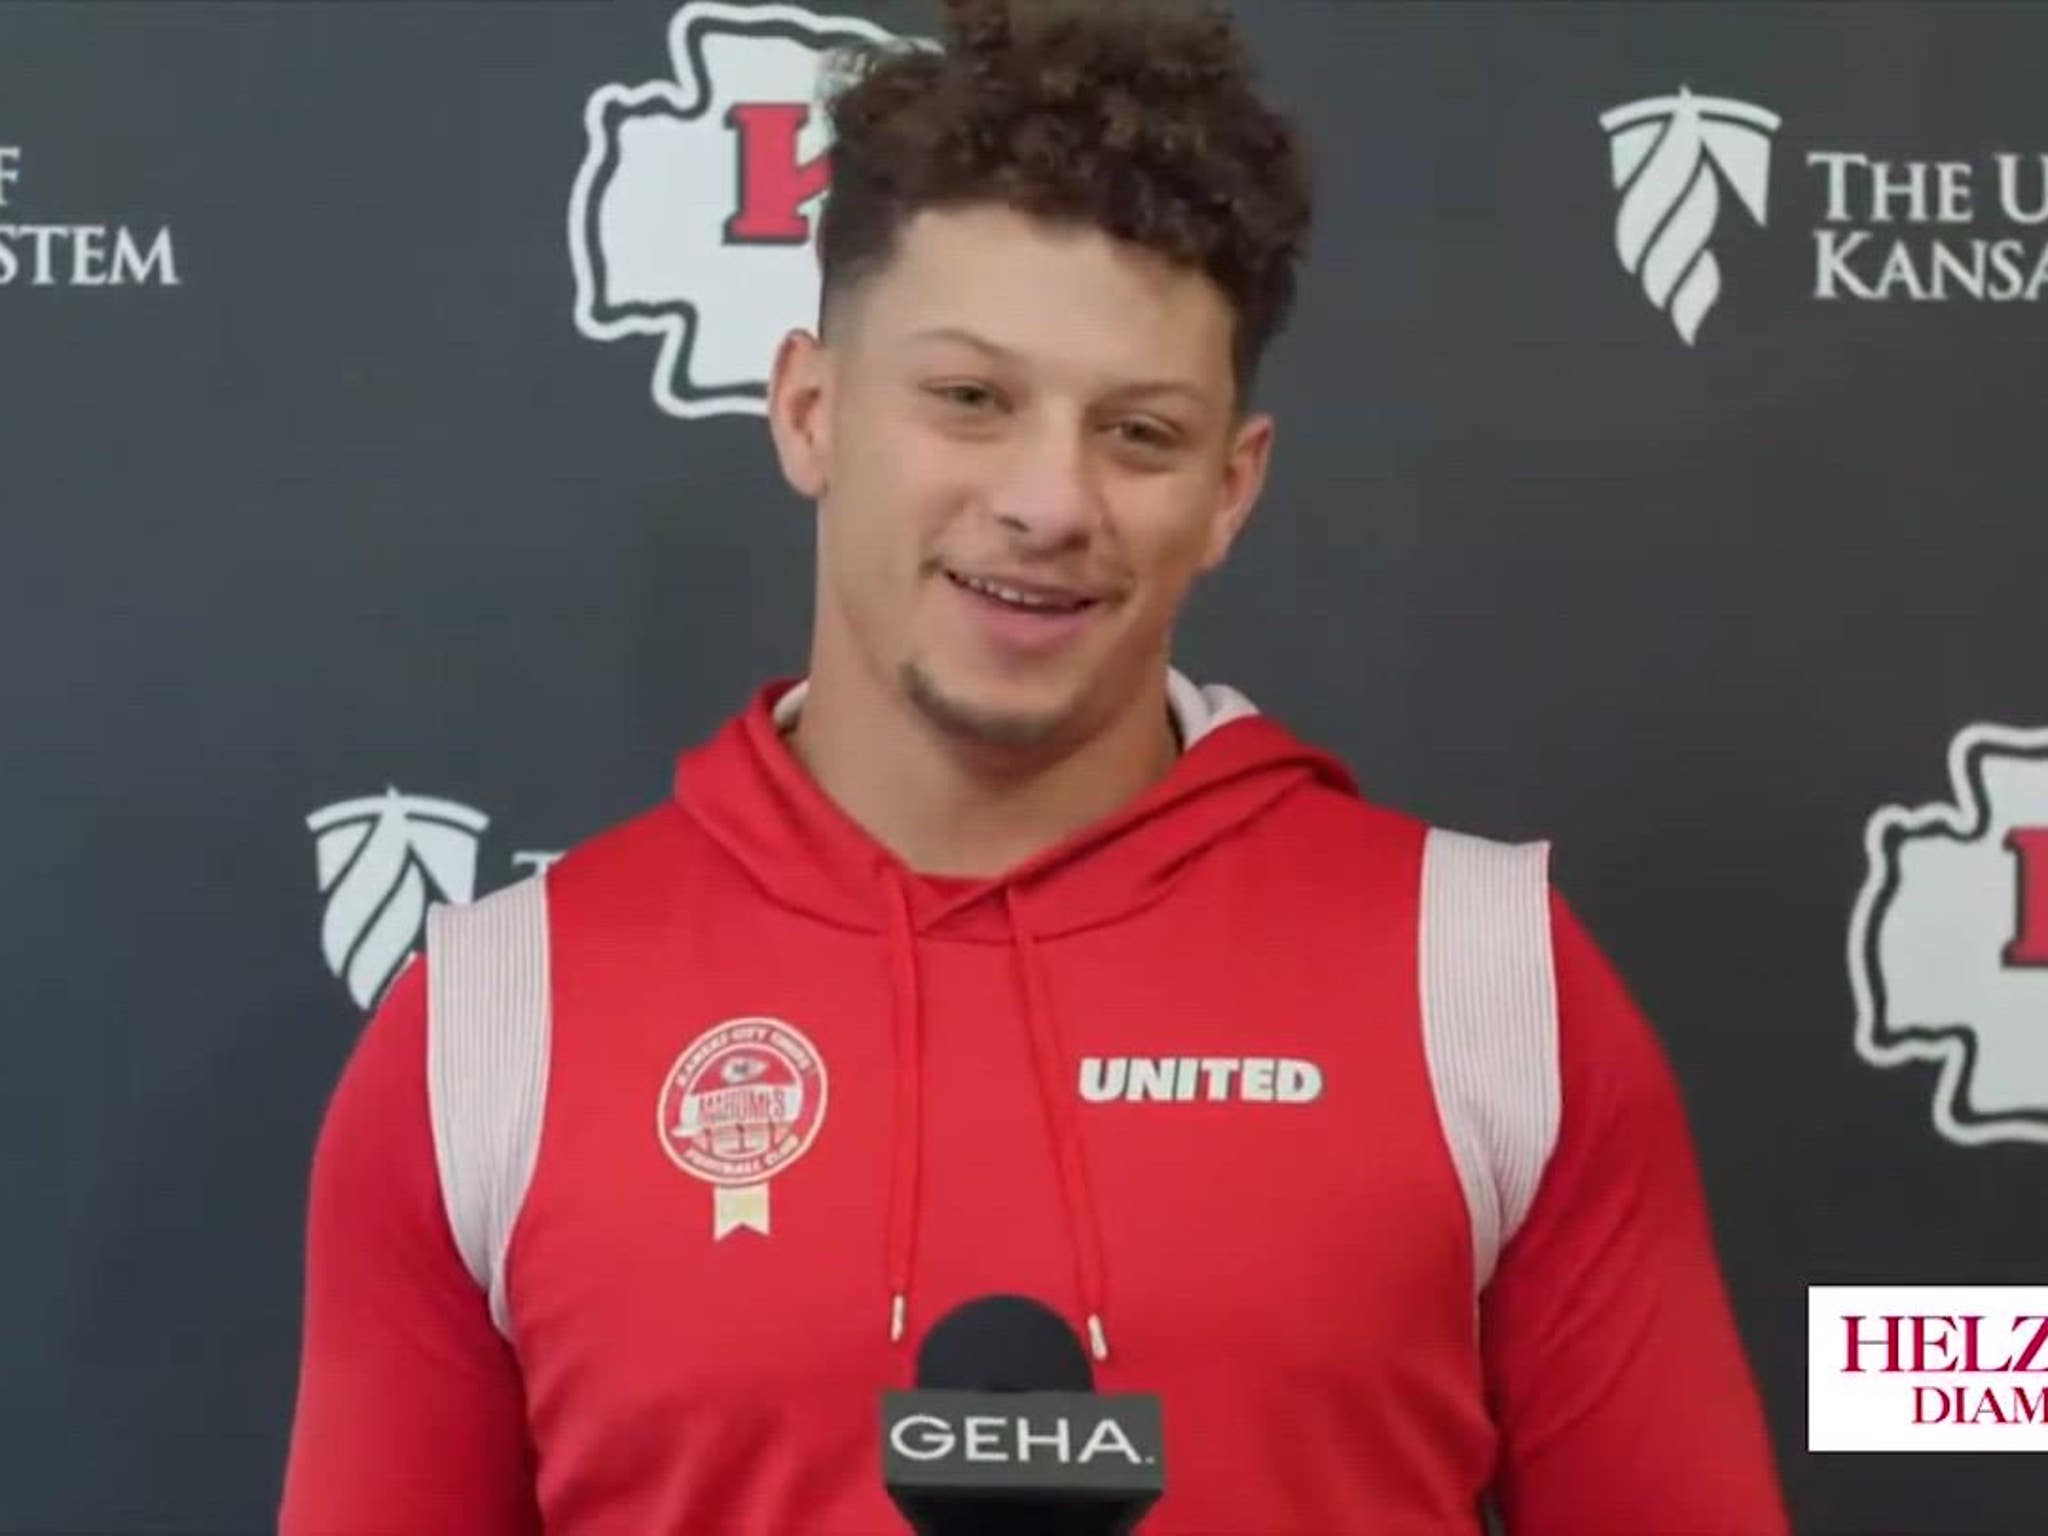 Patrick Mahomes Owns Part of the Royals; Now He's Trying to Bring the NBA  to Kansas City